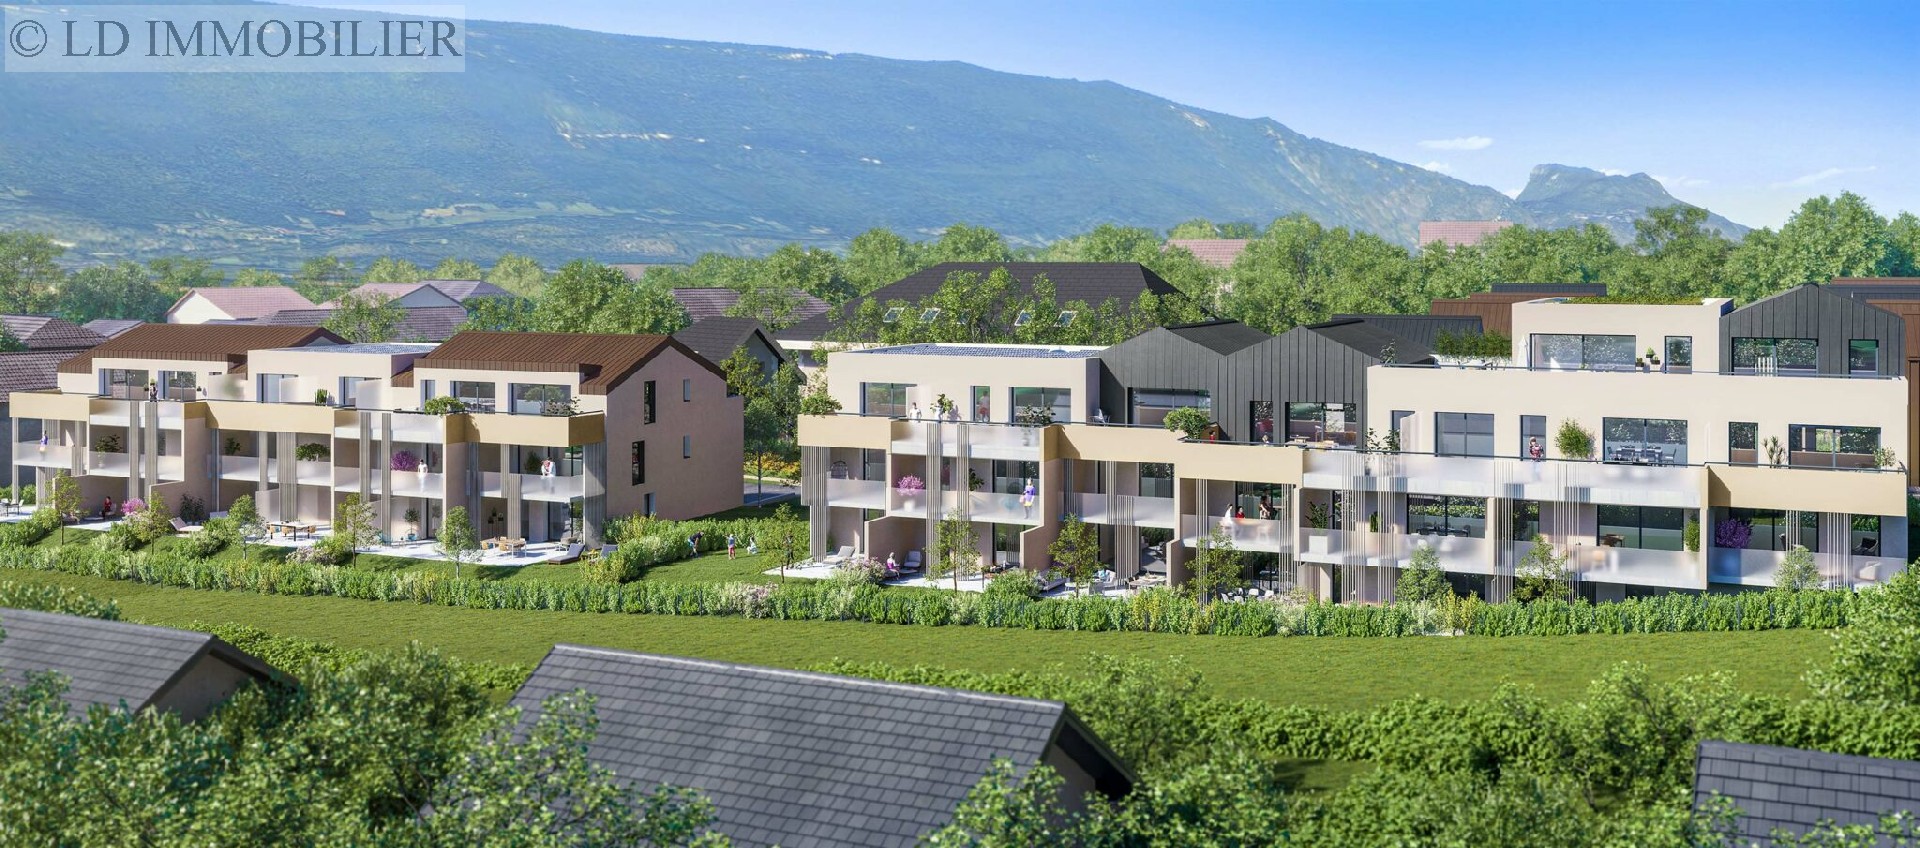 Vente appartement - CHAMBERY 113,8 m², 4 pièces